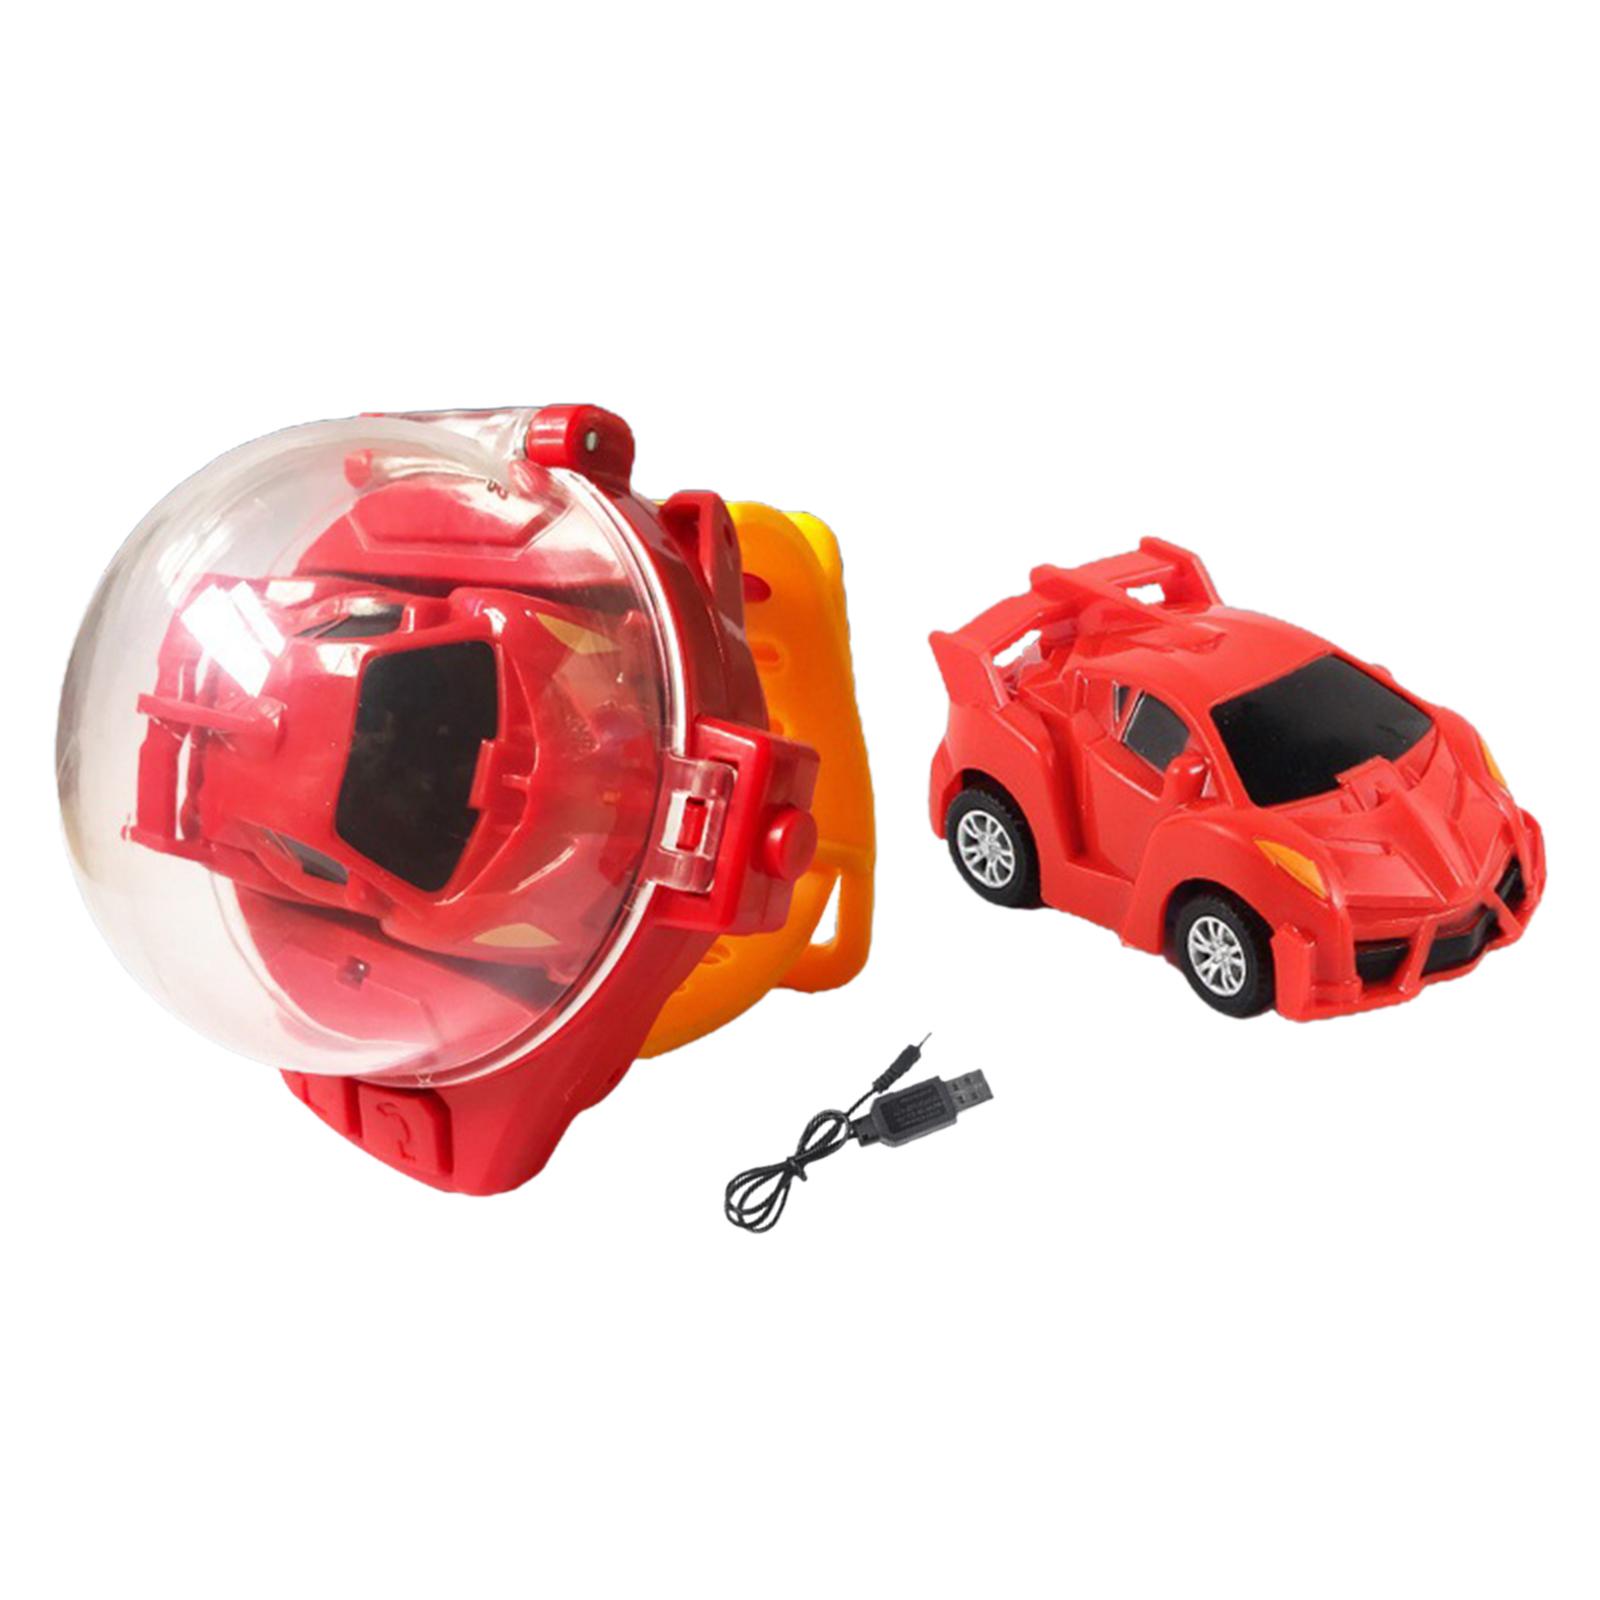 Cartoon Mini RC Remote Control Car Watch Toys Children Electric Wrist Rechargeable Wrist Racing Cars Watch For Boys Girls GiftType:white